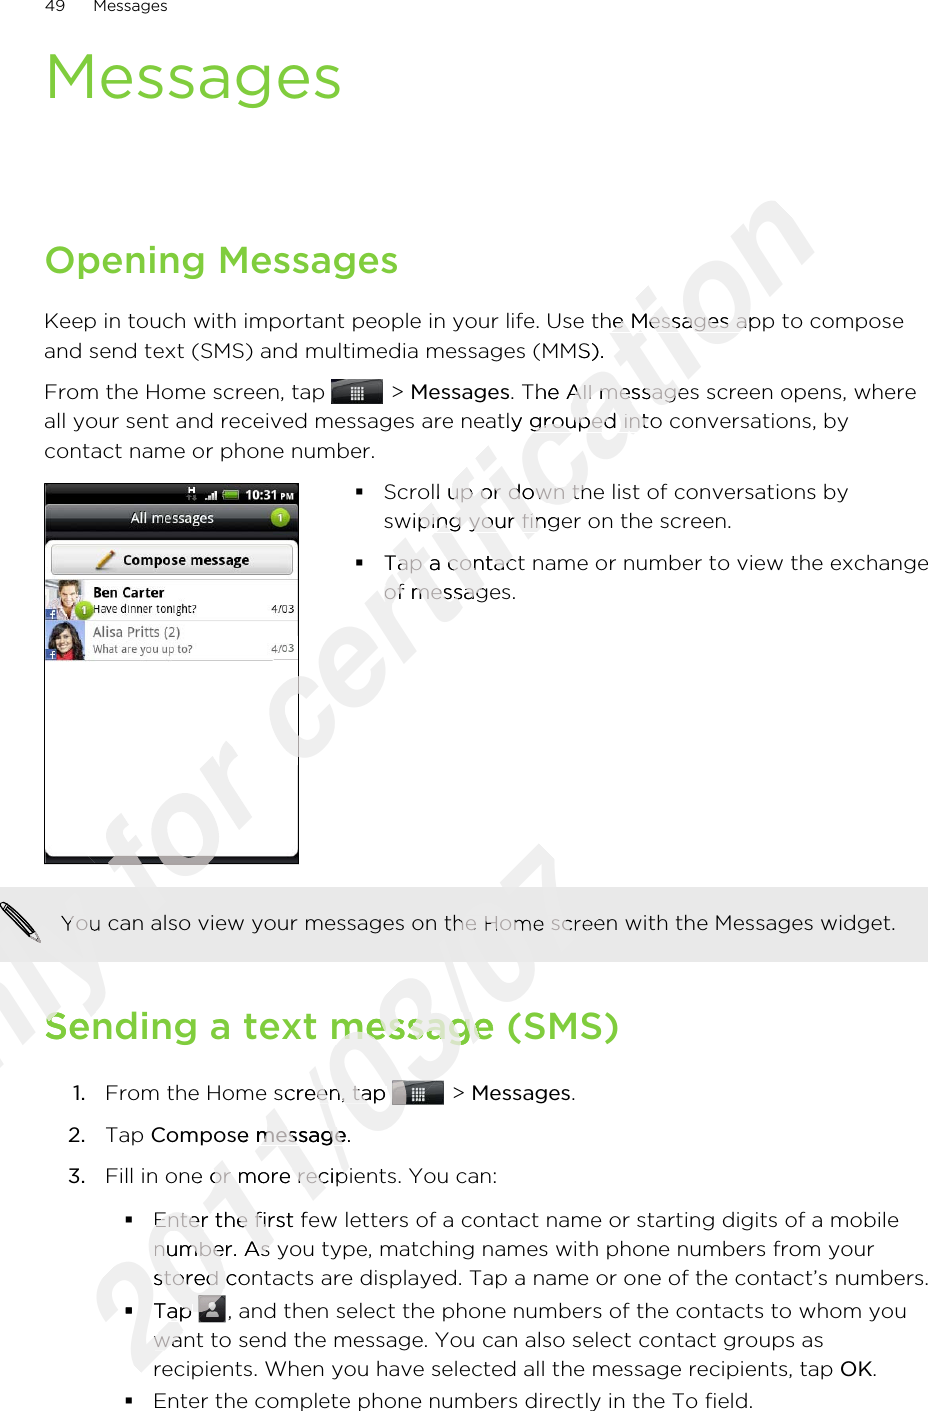 MessagesOpening MessagesKeep in touch with important people in your life. Use the Messages app to composeand send text (SMS) and multimedia messages (MMS).From the Home screen, tap   &gt; Messages. The All messages screen opens, whereall your sent and received messages are neatly grouped into conversations, bycontact name or phone number.§Scroll up or down the list of conversations byswiping your finger on the screen.§Tap a contact name or number to view the exchangeof messages.You can also view your messages on the Home screen with the Messages widget.Sending a text message (SMS)1. From the Home screen, tap   &gt; Messages.2. Tap Compose message.3. Fill in one or more recipients. You can:§Enter the first few letters of a contact name or starting digits of a mobilenumber. As you type, matching names with phone numbers from yourstored contacts are displayed. Tap a name or one of the contact’s numbers.§Tap  , and then select the phone numbers of the contacts to whom youwant to send the message. You can also select contact groups asrecipients. When you have selected all the message recipients, tap OK.§Enter the complete phone numbers directly in the To field.49 MessagesOnly Only Only Only Only Only Only Only Only You can also view your messages on the Home screen with the Messages widget.Only You can also view your messages on the Home screen with the Messages widget.Sending a text message (SMS)Only Sending a text message (SMS)for for for for You can also view your messages on the Home screen with the Messages widget.for You can also view your messages on the Home screen with the Messages widget.certification Keep in touch with important people in your life. Use the Messages app to composecertification Keep in touch with important people in your life. Use the Messages app to composeand send text (SMS) and multimedia messages (MMS).certification and send text (SMS) and multimedia messages (MMS).. The All messages screen opens, wherecertification . The All messages screen opens, whereall your sent and received messages are neatly grouped into conversations, bycertification all your sent and received messages are neatly grouped into conversations, bycertification certification Scroll up or down the list of conversations bycertification Scroll up or down the list of conversations byswiping your finger on the screen.certification swiping your finger on the screen.Tap a contact name or number to view the exchangecertification Tap a contact name or number to view the exchangeof messages.certification of messages.2011/03/072011/03/07You can also view your messages on the Home screen with the Messages widget.2011/03/07You can also view your messages on the Home screen with the Messages widget.Sending a text message (SMS)2011/03/07Sending a text message (SMS)From the Home screen, tap 2011/03/07From the Home screen, tap 2011/03/07Compose message2011/03/07Compose message.2011/03/07.Fill in one or more recipients. You can:2011/03/07Fill in one or more recipients. You can:Enter the first few letters of a contact name or starting digits of a mobile2011/03/07Enter the first few letters of a contact name or starting digits of a mobilenumber. As you type, matching names with phone numbers from your2011/03/07number. As you type, matching names with phone numbers from yourstored contacts are displayed. Tap a name or one of the contact’s numbers.2011/03/07stored contacts are displayed. Tap a name or one of the contact’s numbers.§2011/03/07§Tap 2011/03/07Tap 2011/03/07want to send the message. You can also select contact groups as2011/03/07want to send the message. You can also select contact groups asrecipients. When you have selected all the message recipients, tap 2011/03/07recipients. When you have selected all the message recipients, tap 